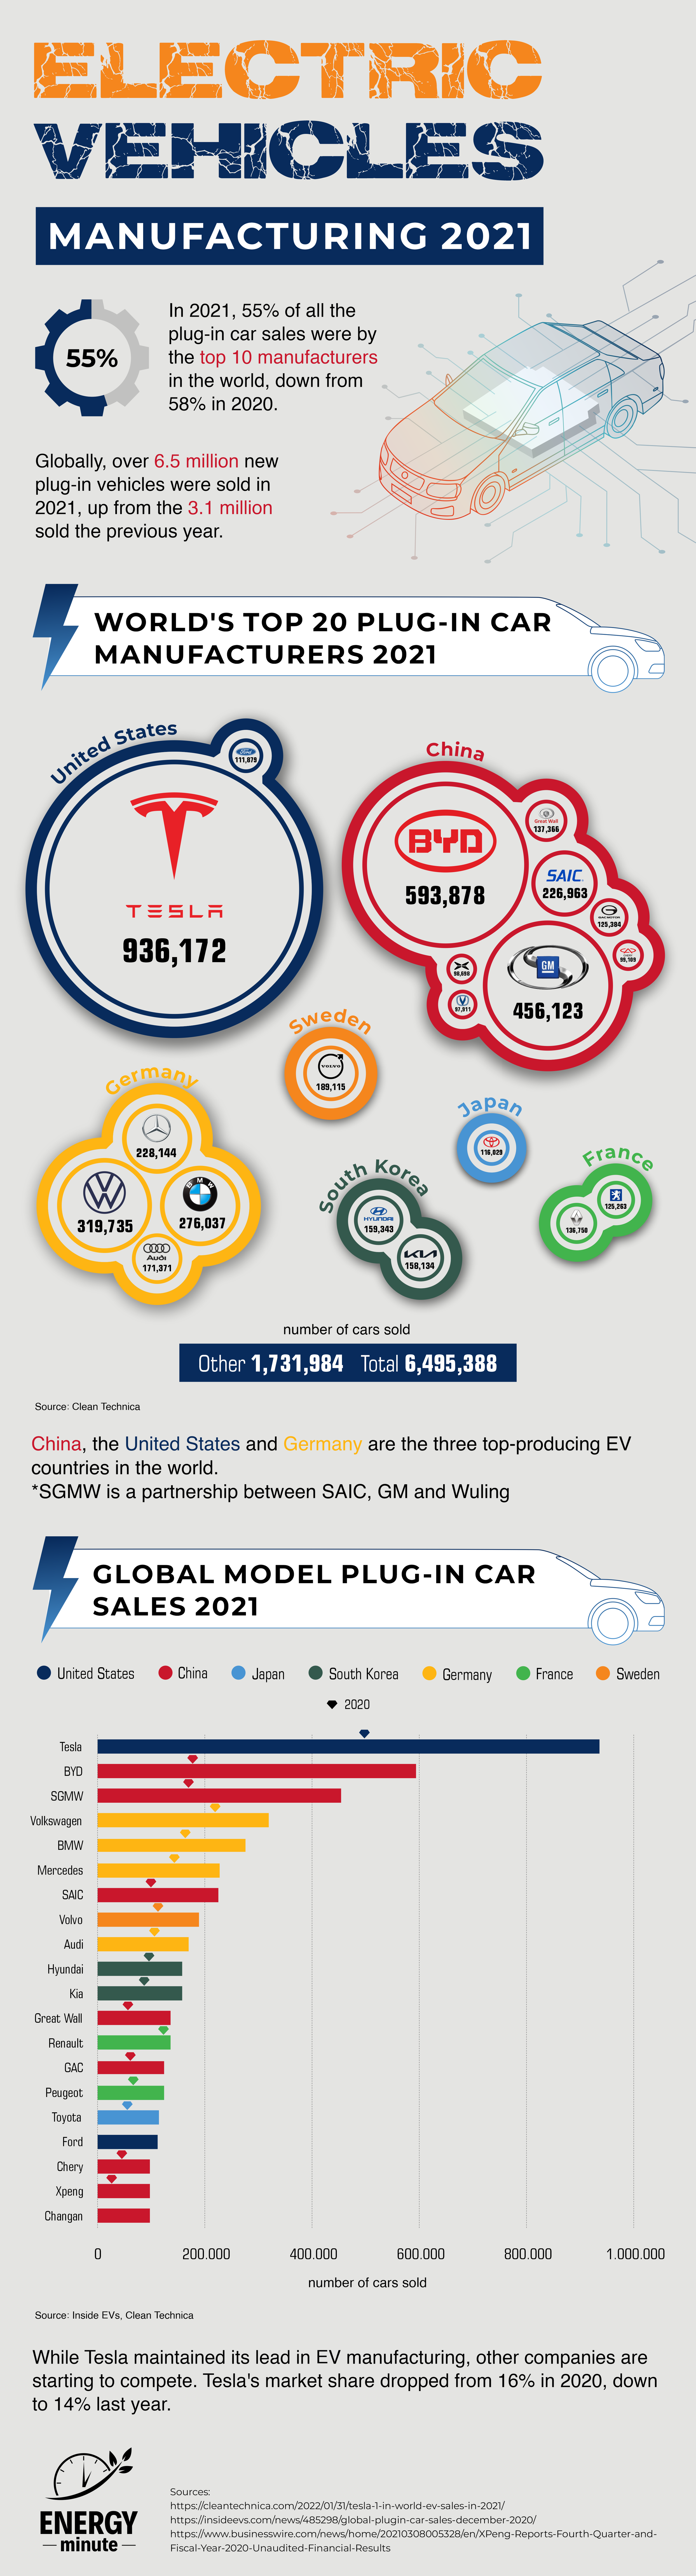 Electric vehicle manufacturers